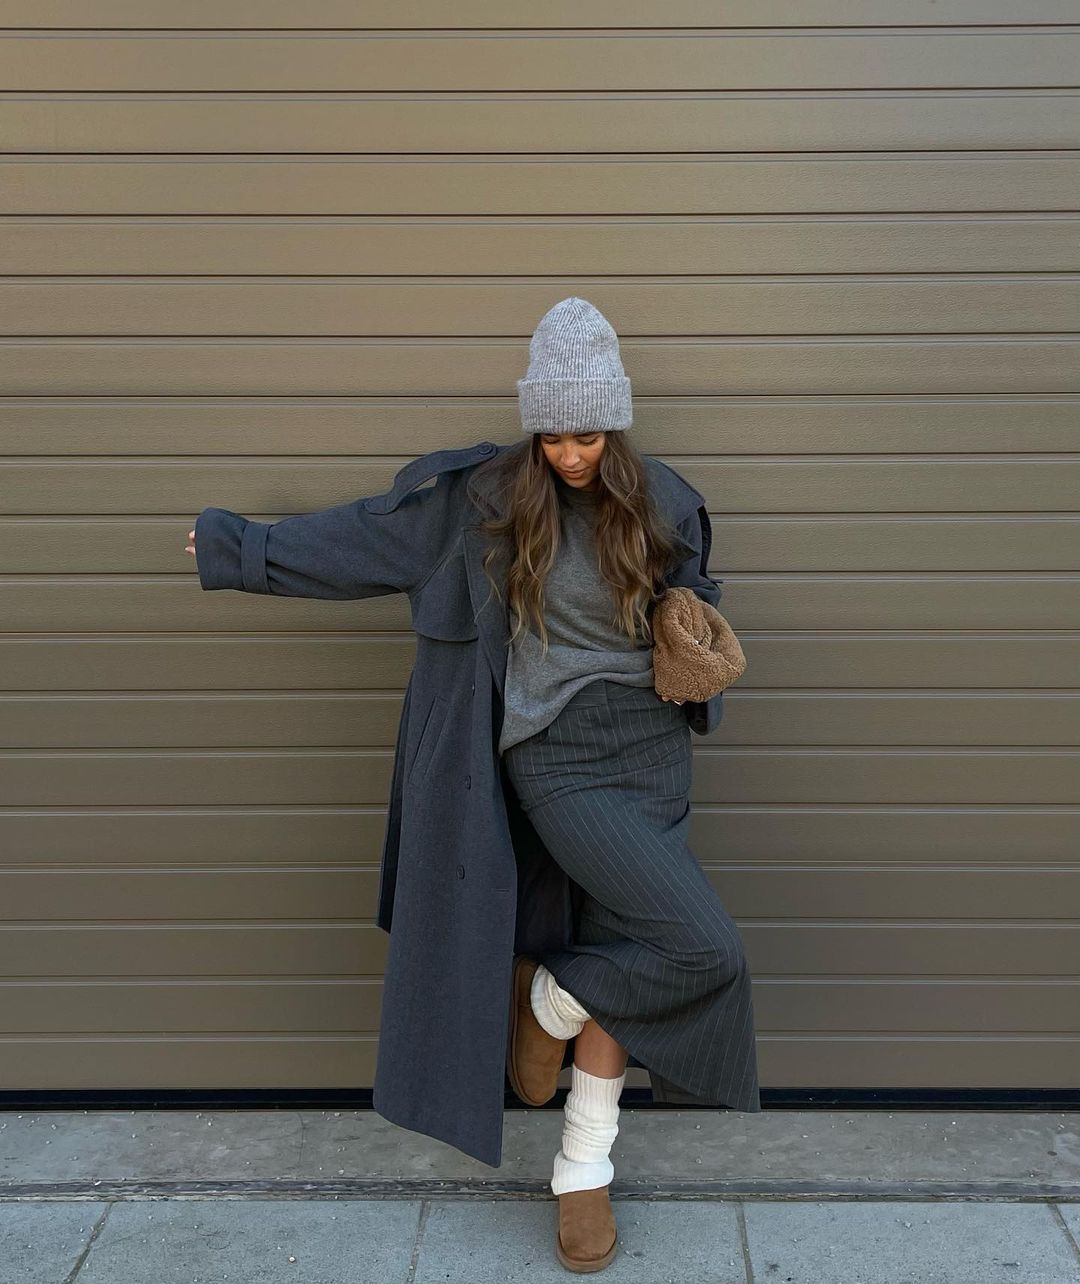 10 Fresh Ways To Wear UGGs Before Winter Is Over